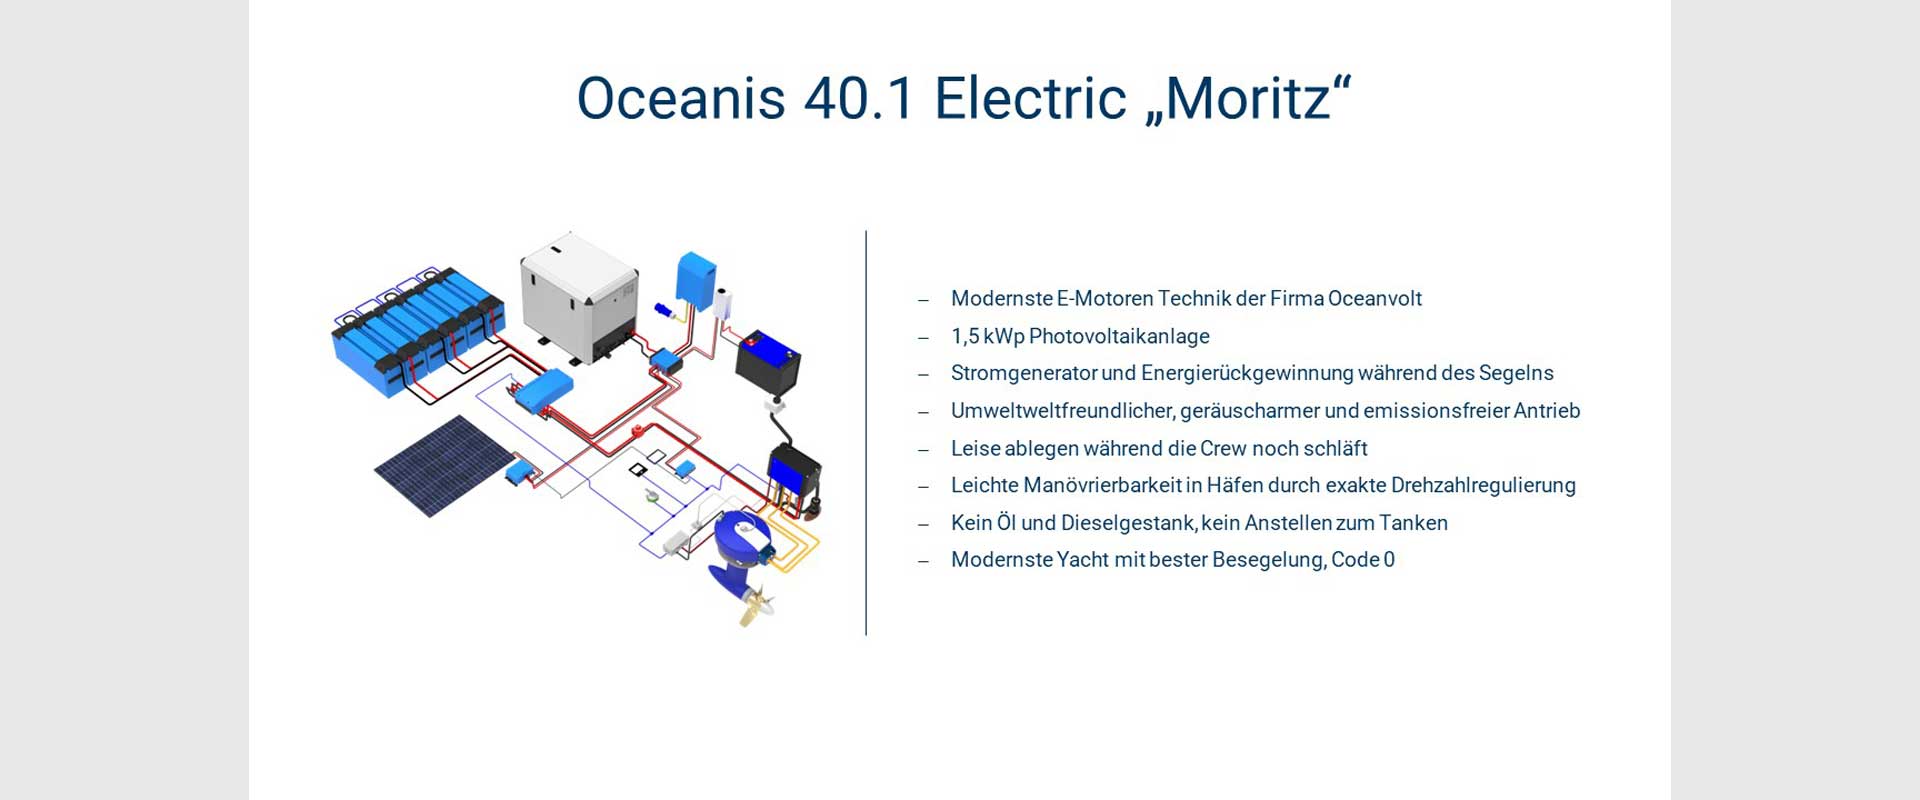 motor-graphic-and-advantages-oceanis-40-1-electric-moritz-1920_800.jpg